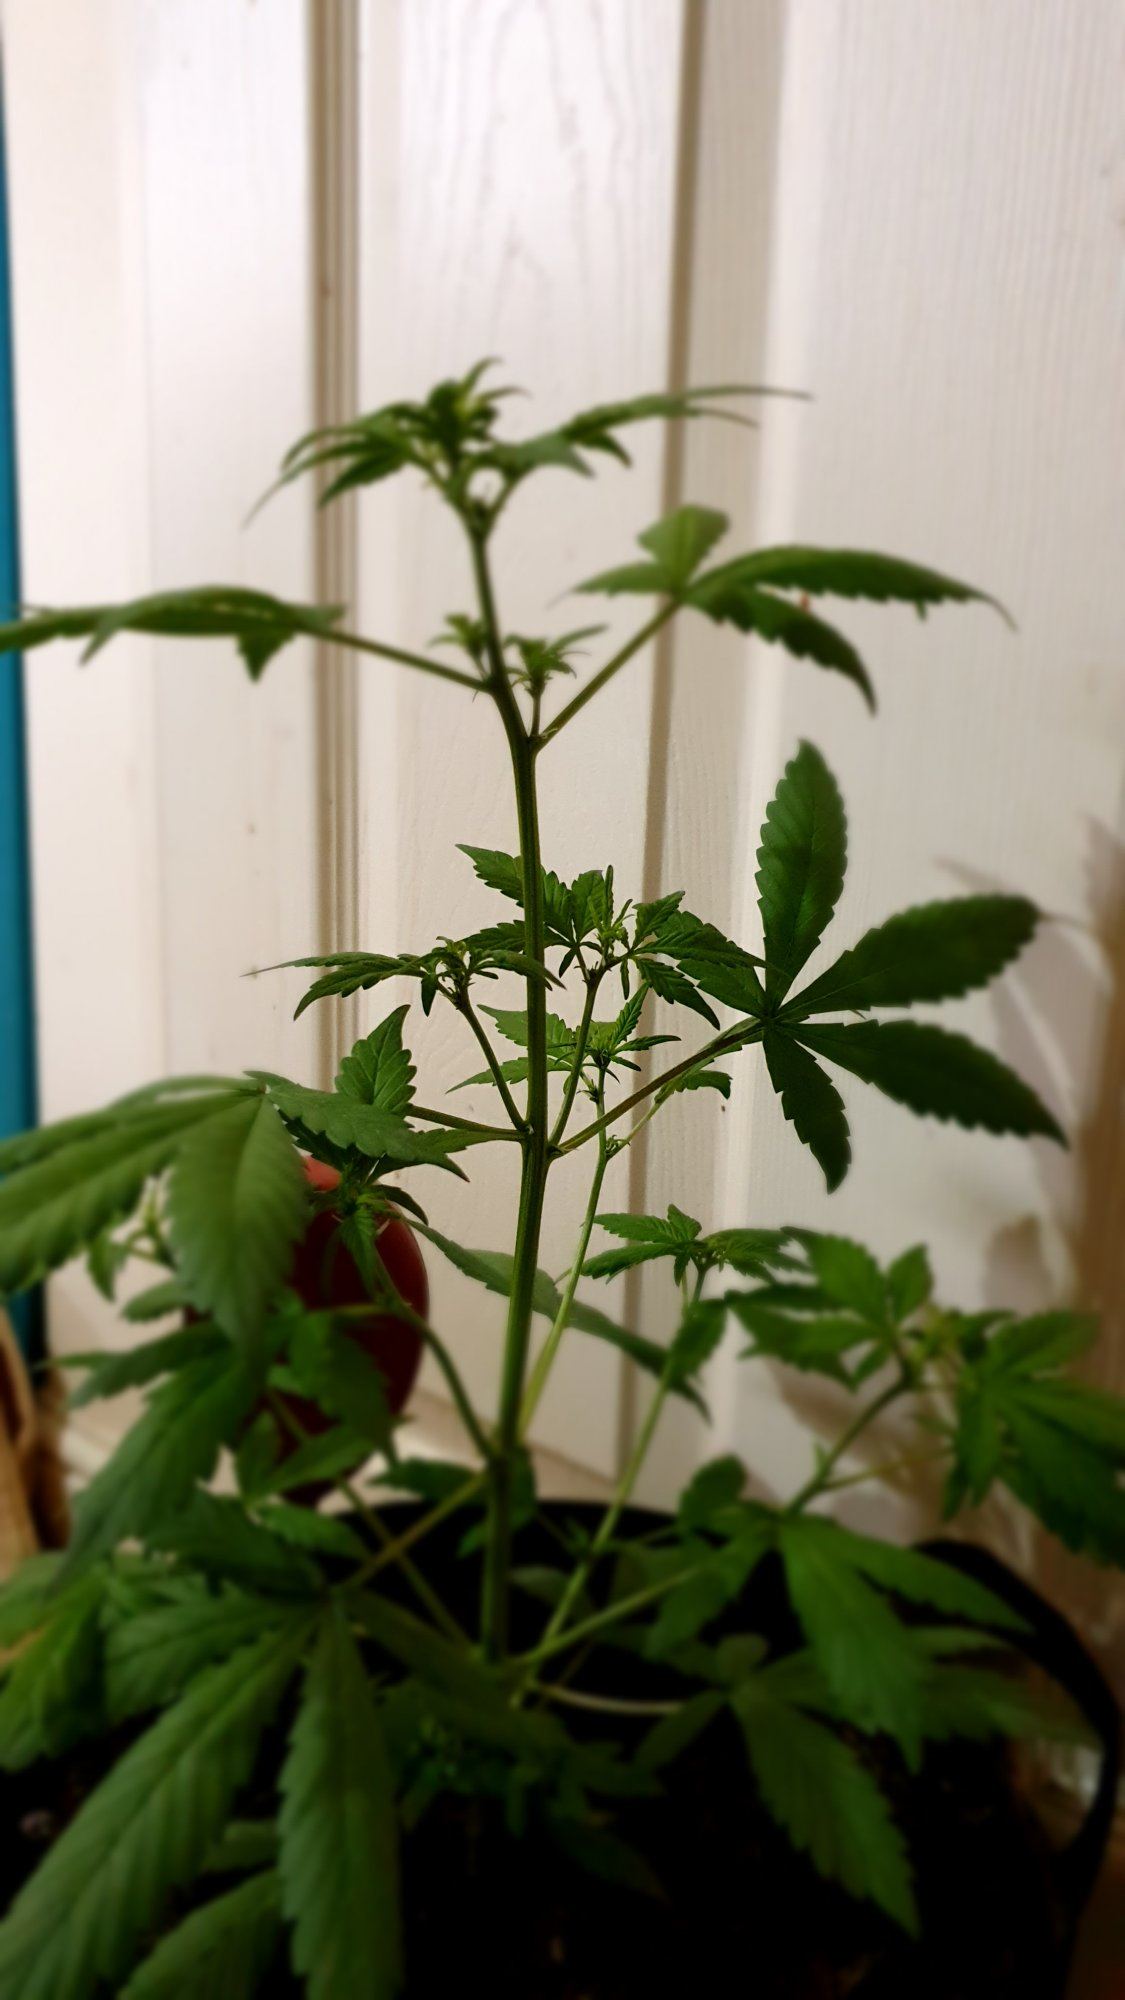 Lsd 25 autoflower  is she stretching